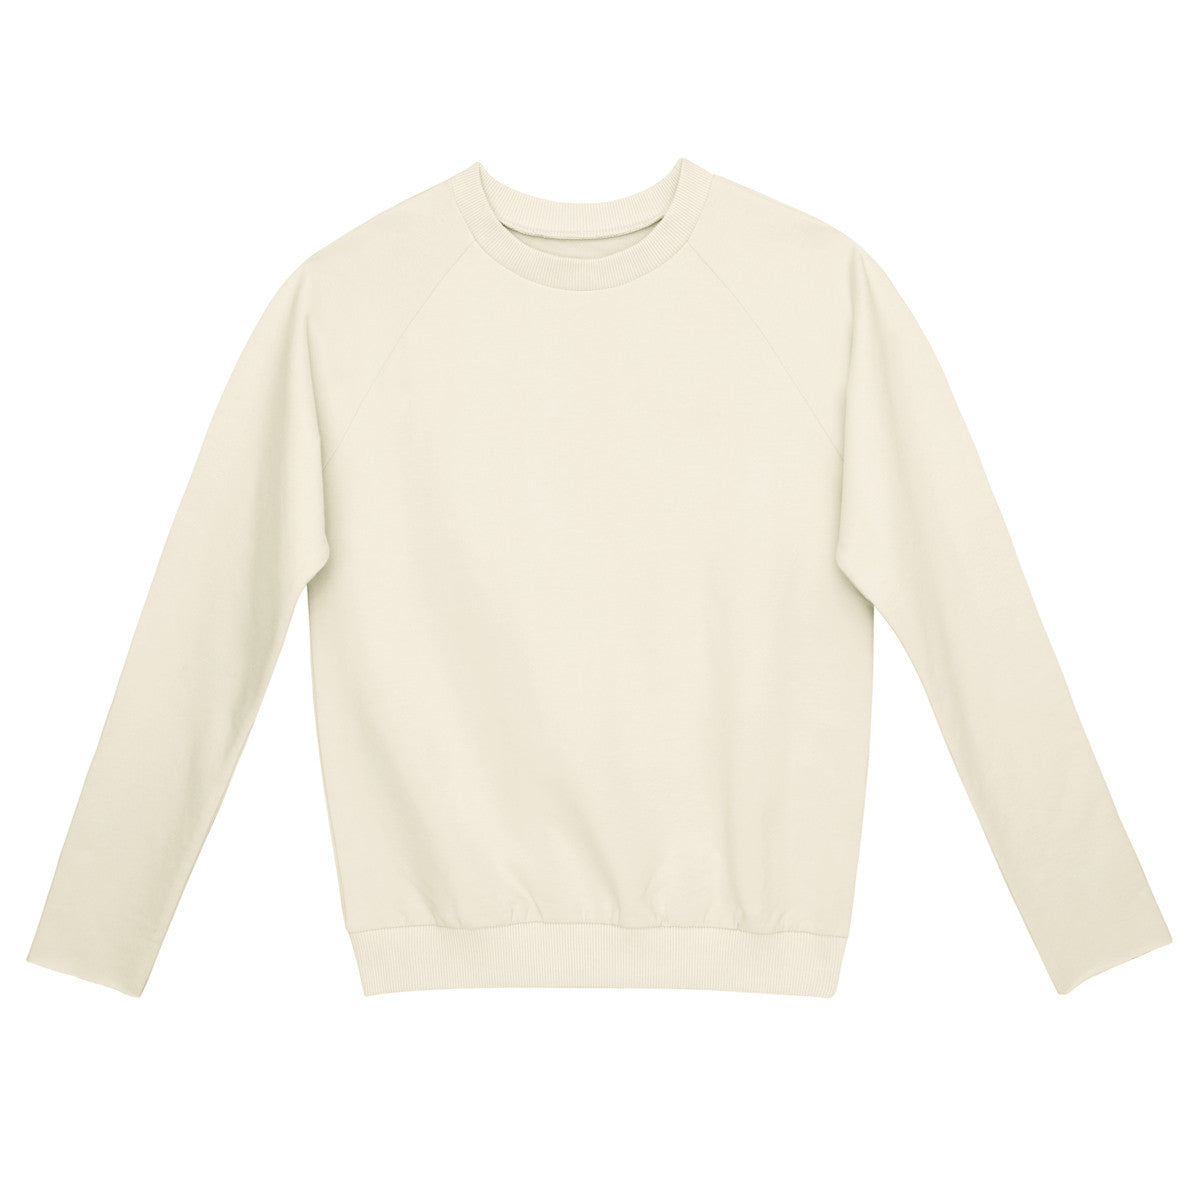 Little Hedonist Adult Sweater Bibi Just the perfect sweater in bleached sand made from organic cotton. Slim fit. For any occasion. Our model is 1.73 cm tall and wears size S. If you are not sure about sizing, we advise you to choose a size smaller than usual.